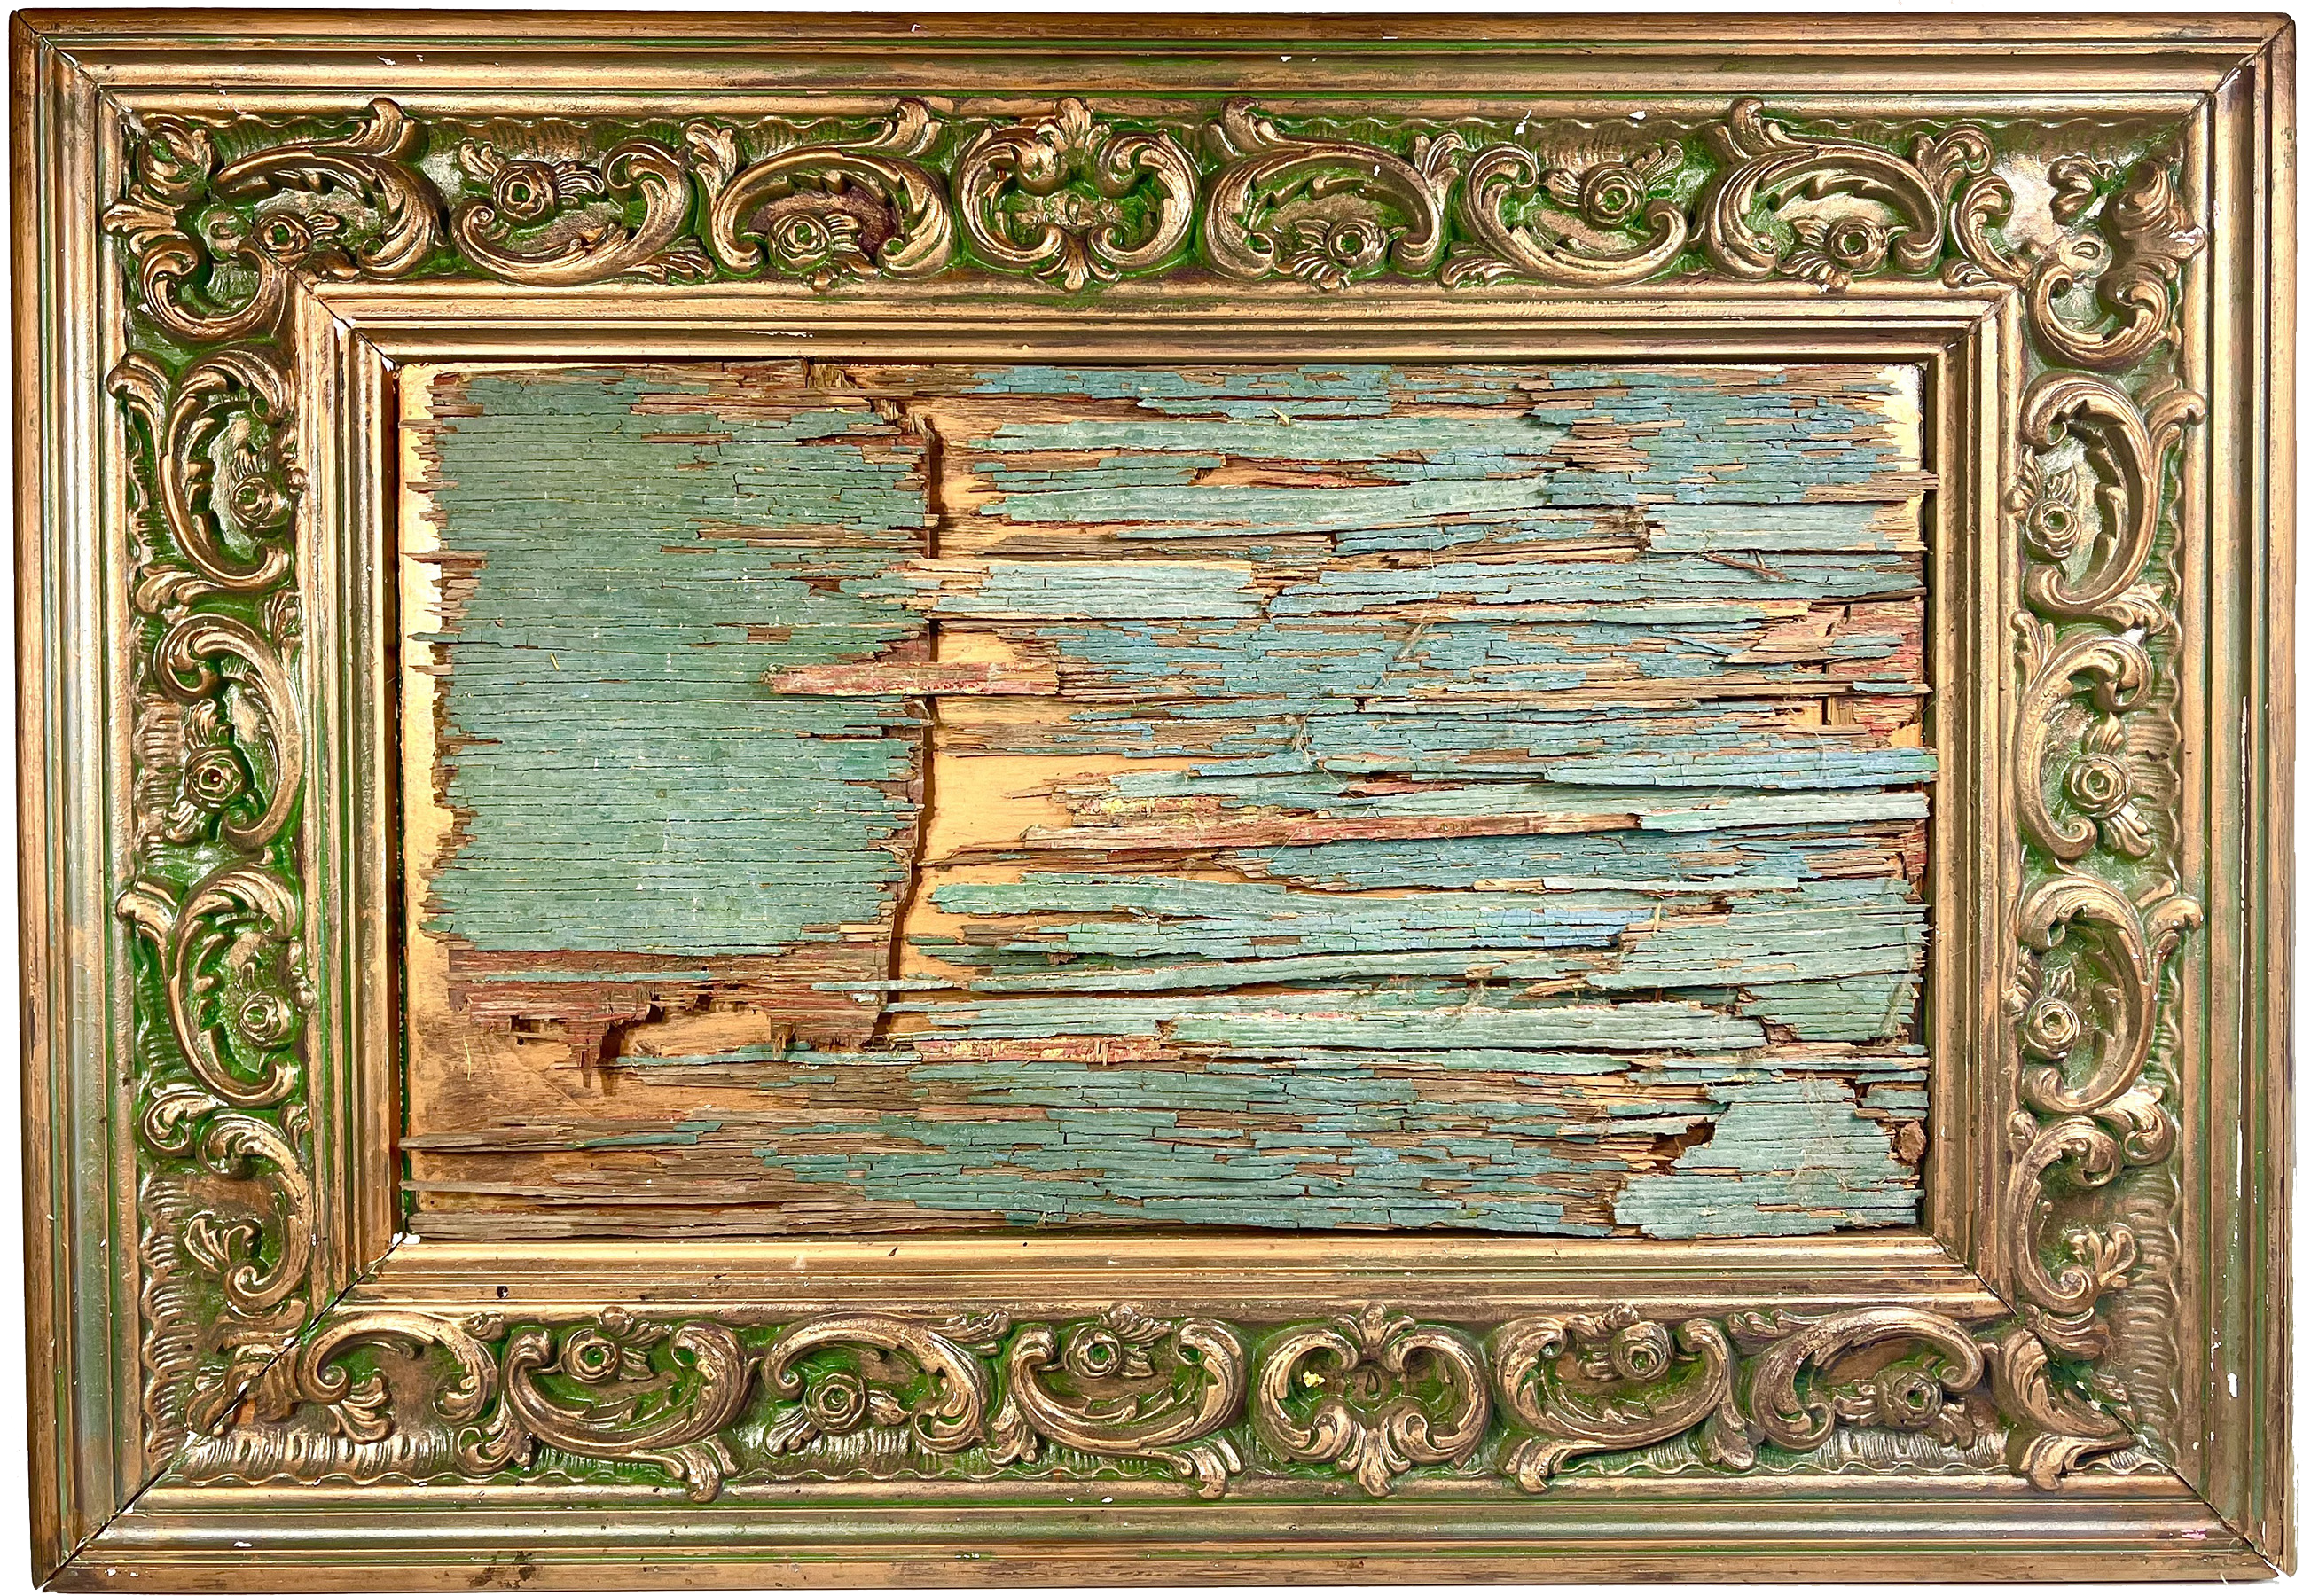 Wood panel with layers of different colors of paint aged over 10 years